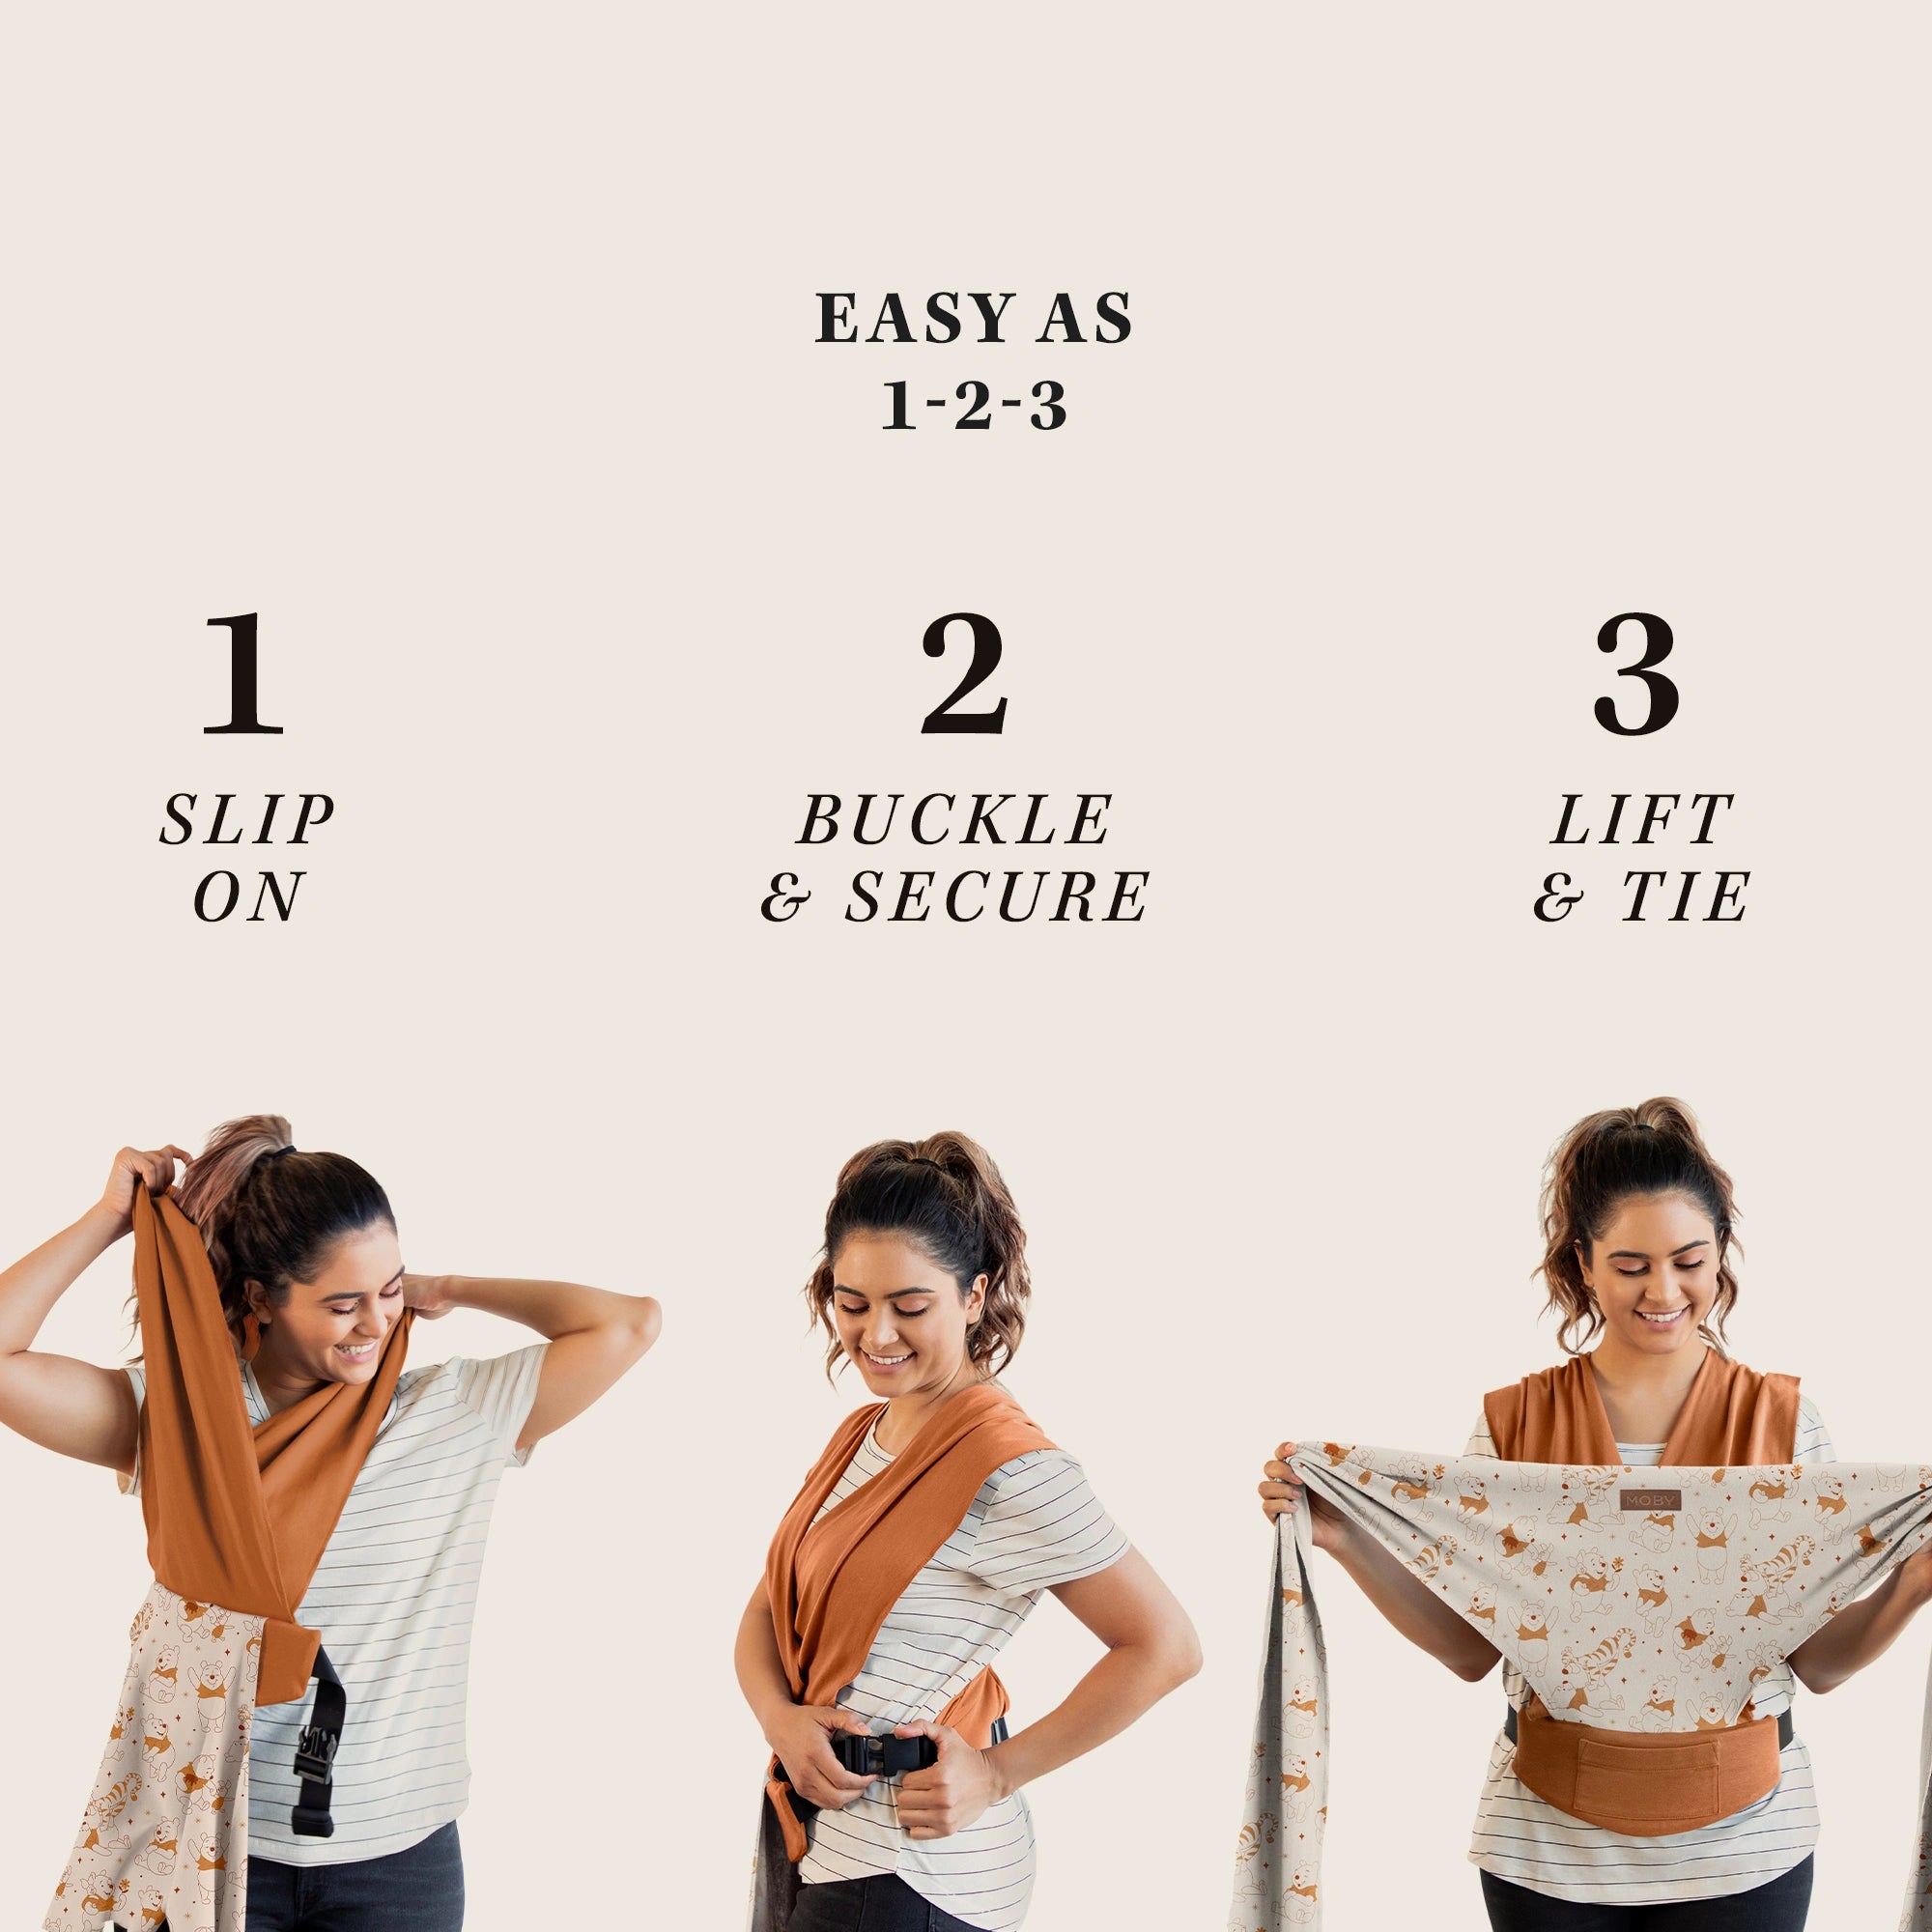 easy-wrap easy as 1-2-3. step 1 slip on, step 2 buckle & secure, step 3 lift and tie